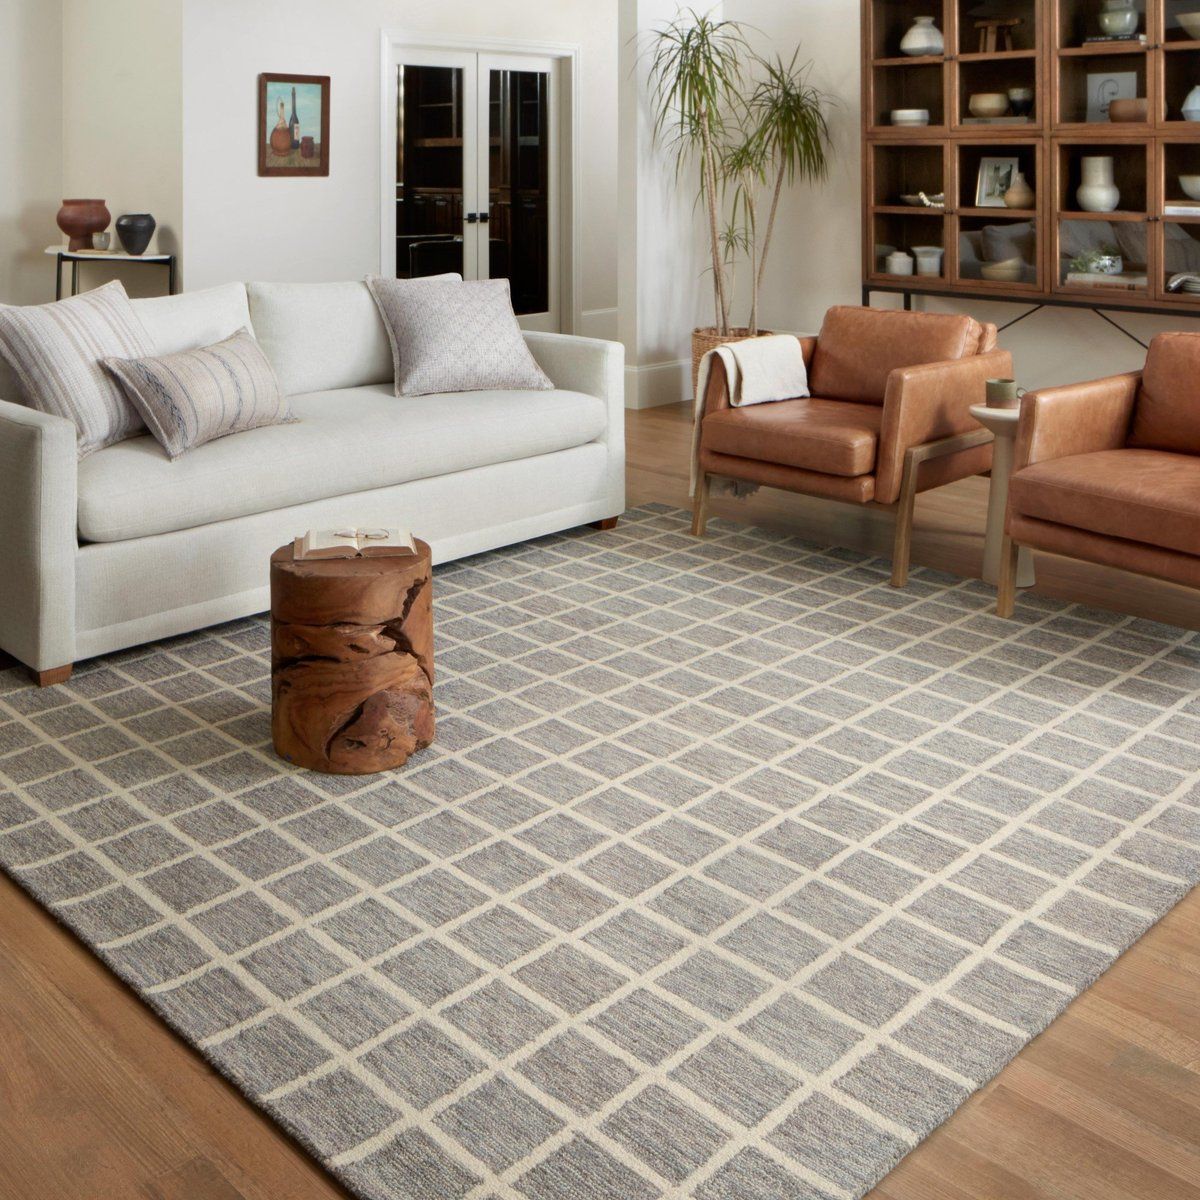 Chris Loves Julia X Loloi Polly Pol 05 Wool Modern Area Rugs | Rugs Direct Throughout Ivory Rugs (Photo 15 of 15)